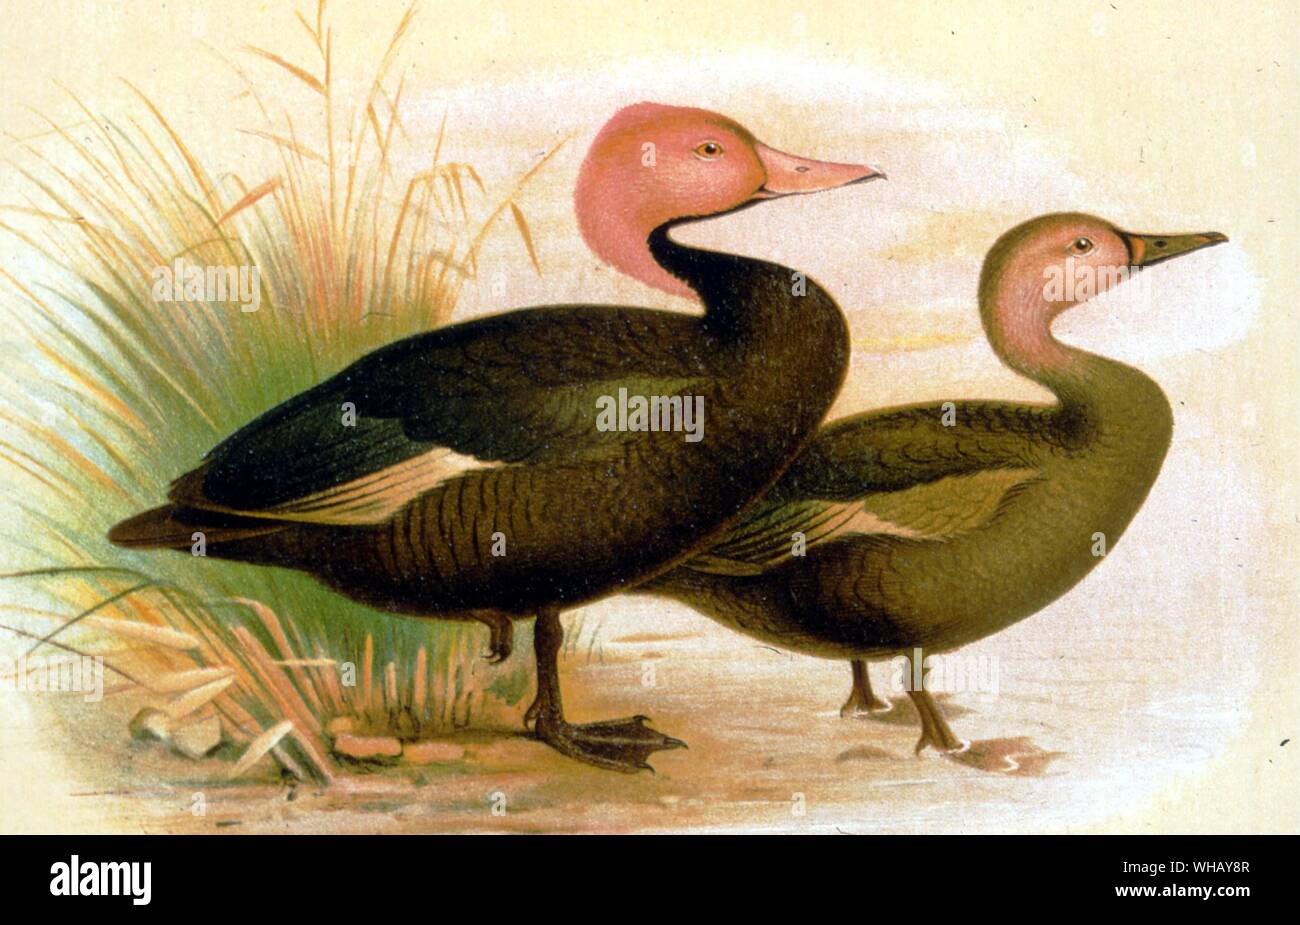 Pink Headed Ducks. Extinct Birds by Errol Fuller page 54. A study of the world's recently extinct bird species with colour and black and white illustrations. Stock Photo